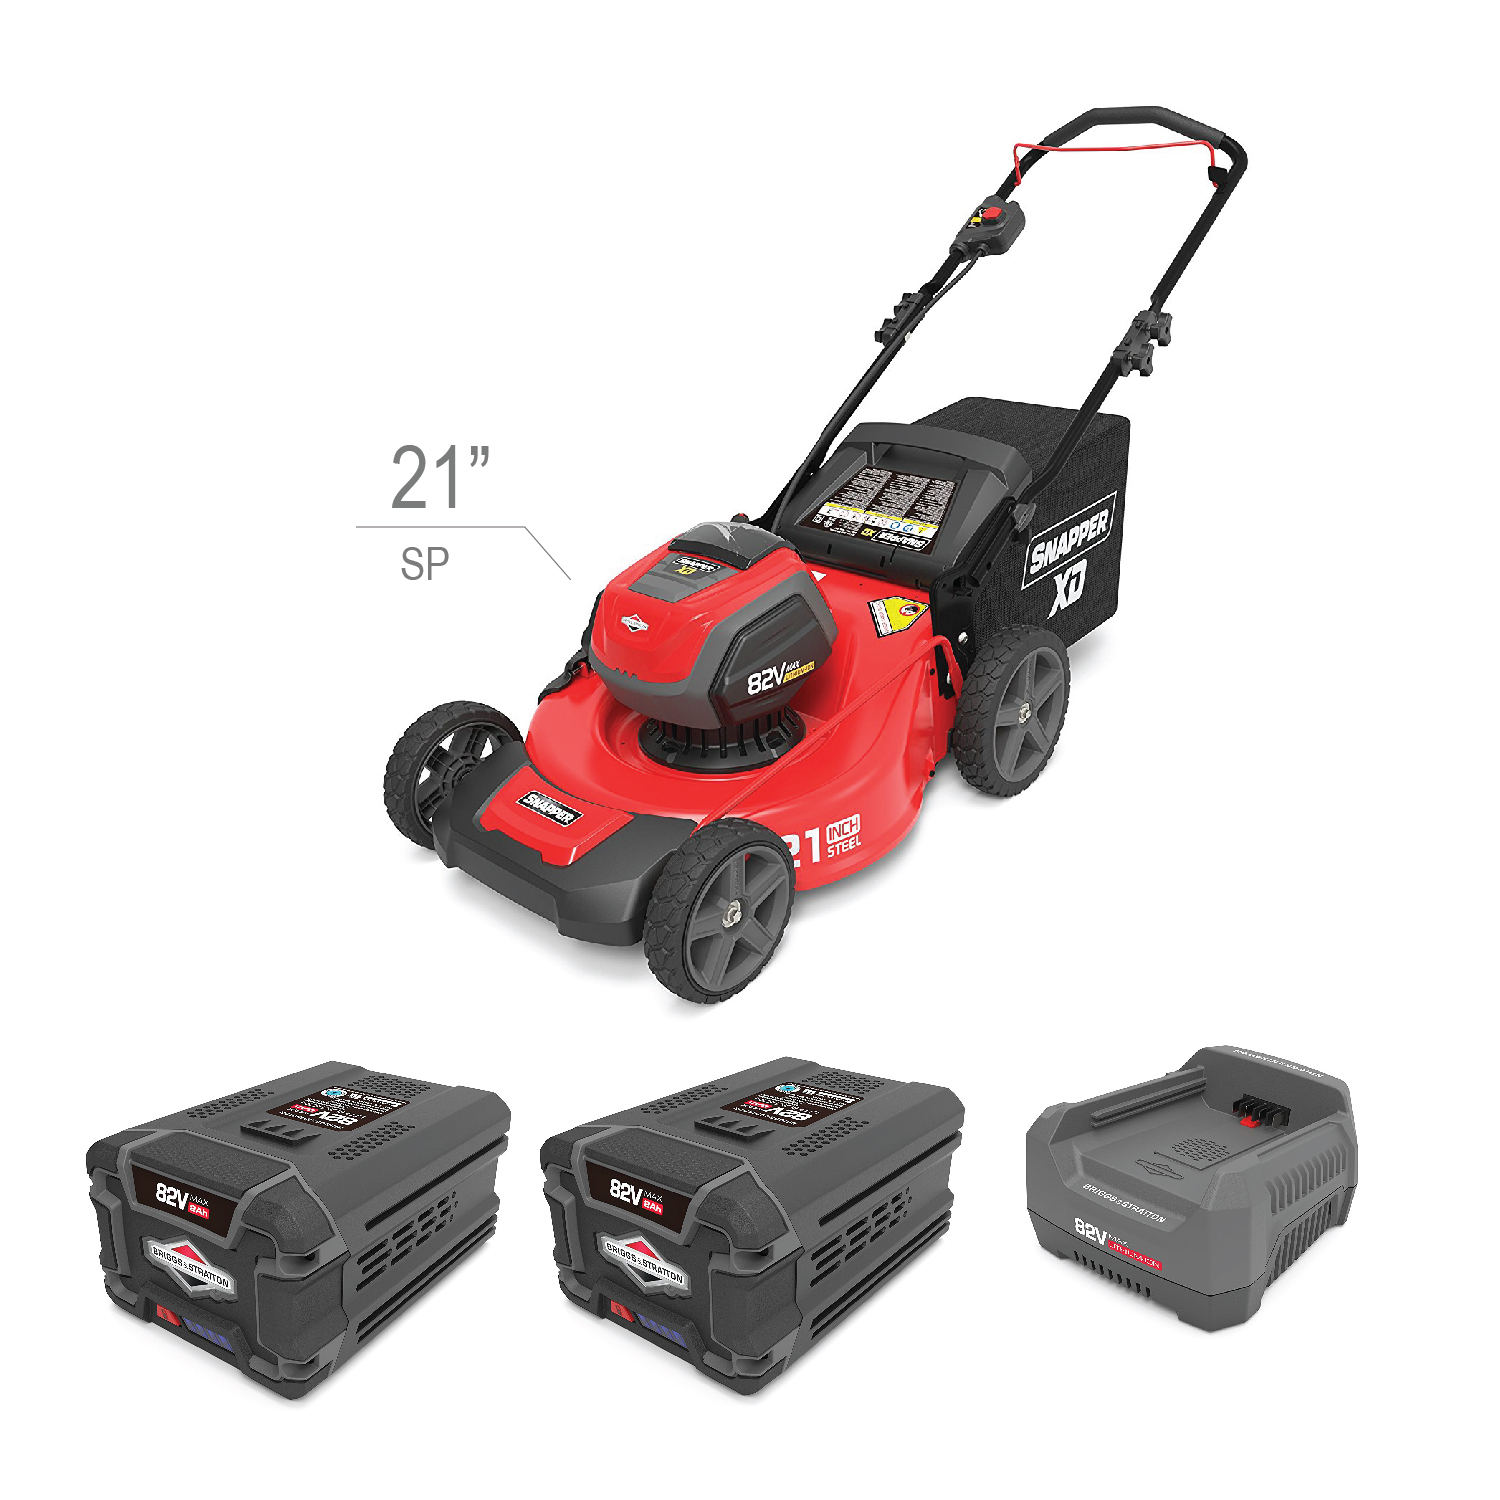 Kit Walk (SP) Mower 21" 82V Charger and two Batteries